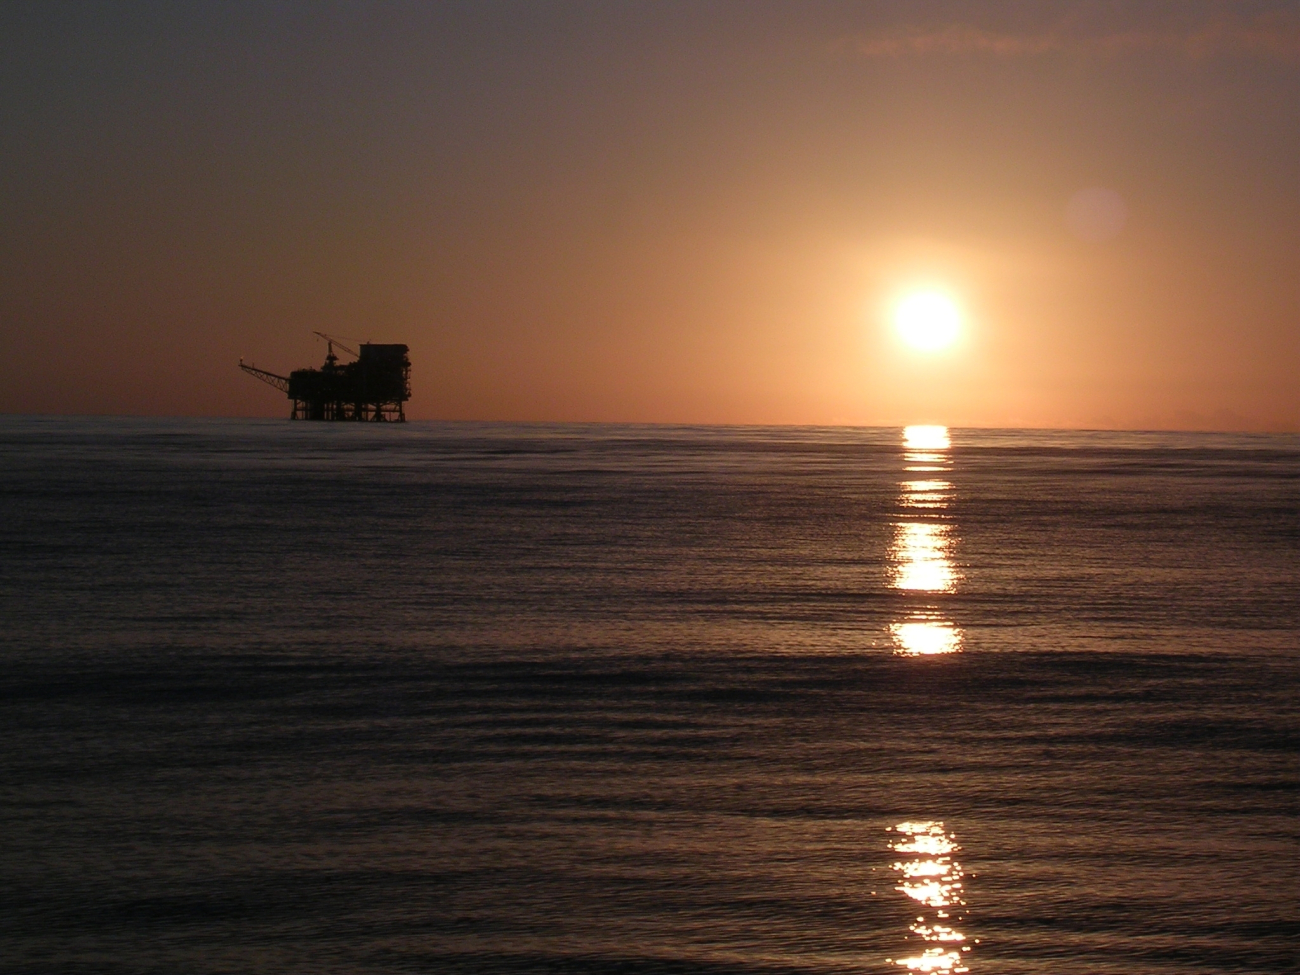 Sunset with an oil rig off Southern California as viewed from the contractfishery research vessel AGRESSOR